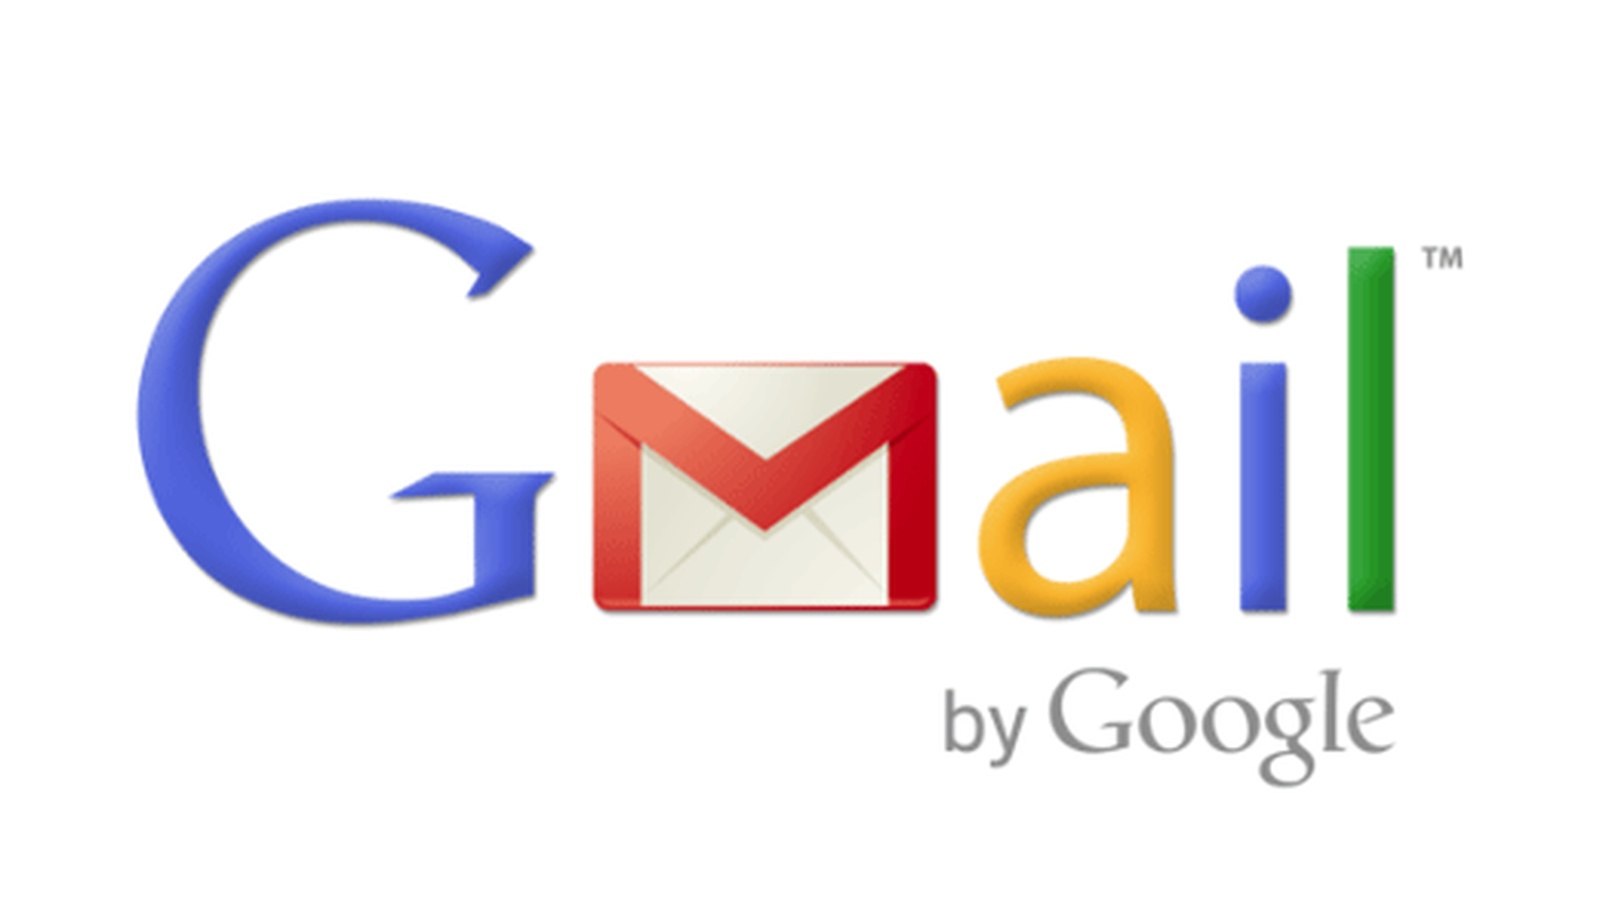 We Love Our Gmail Friends!